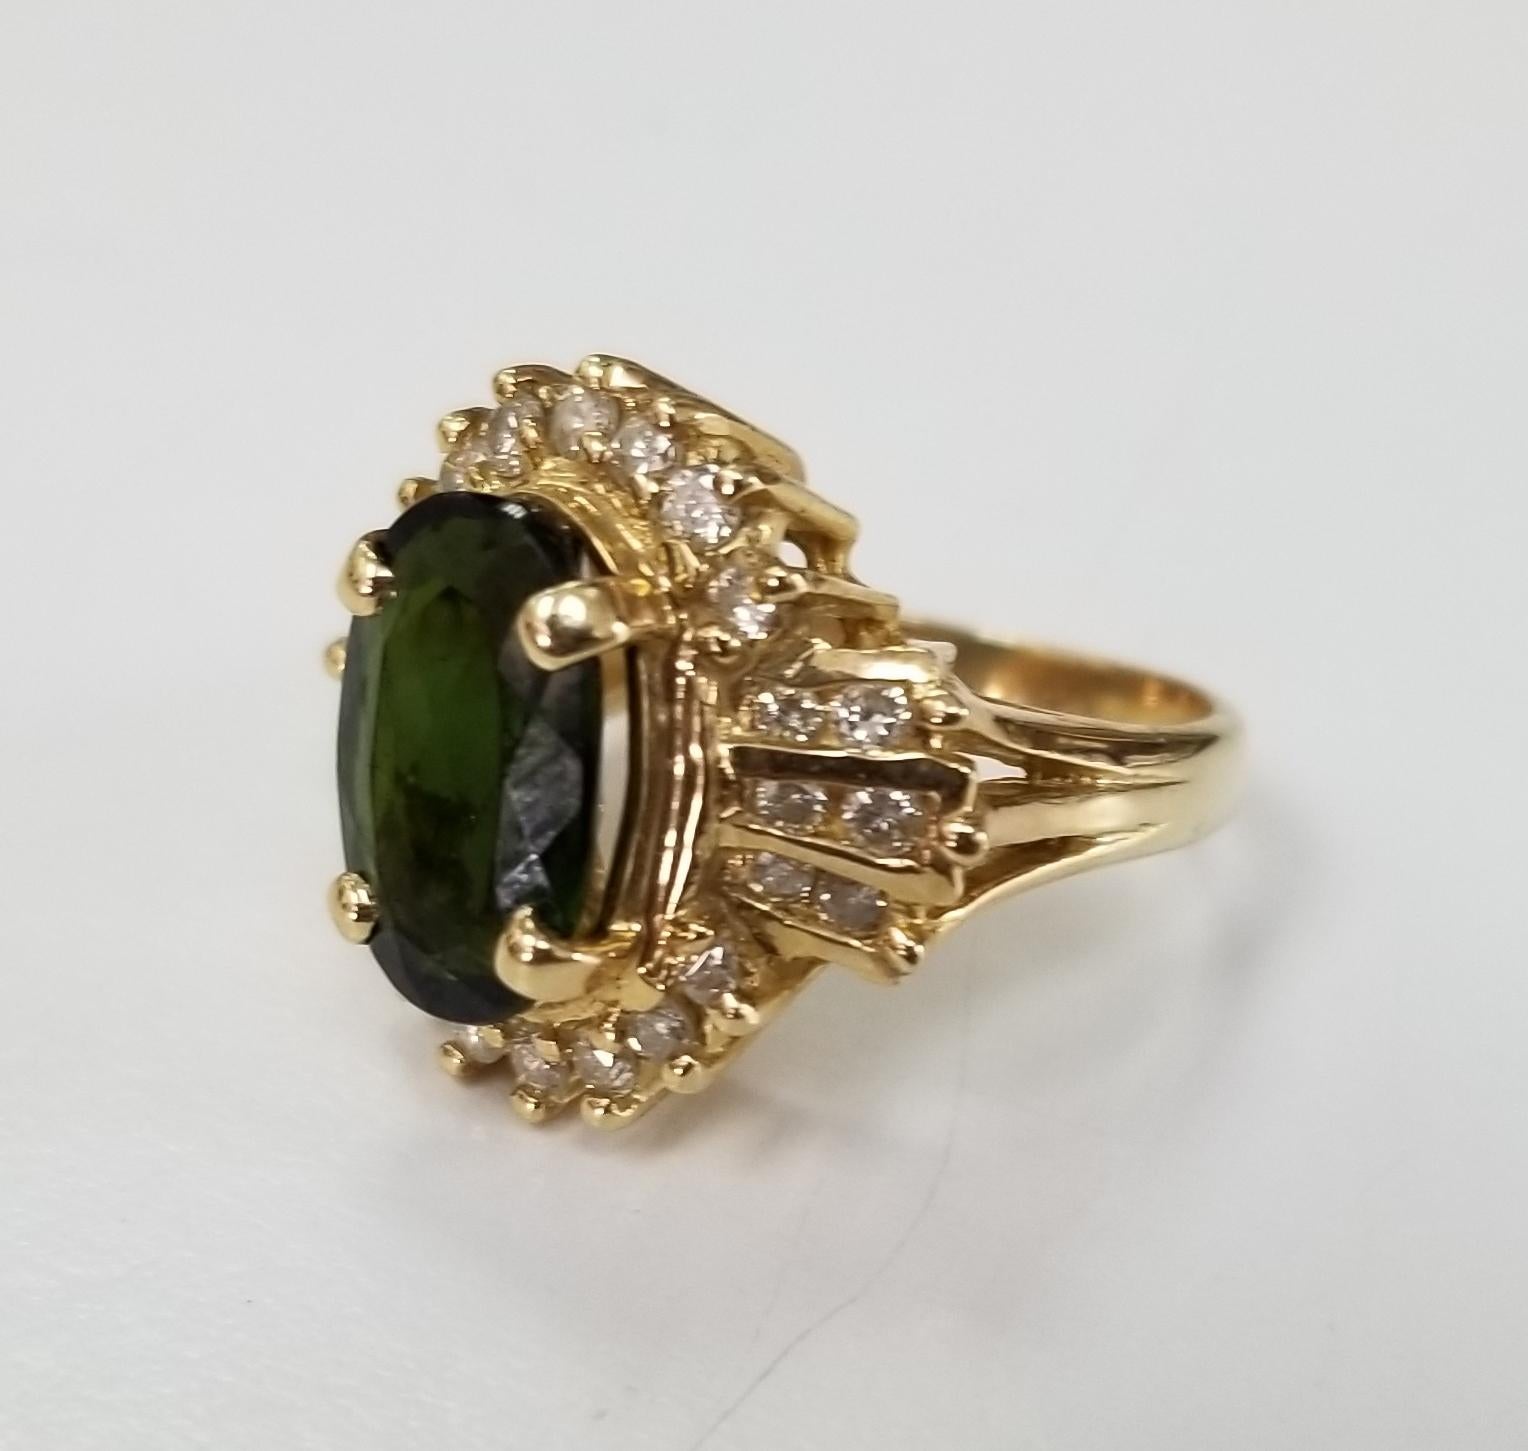 14k yellow gold Green Tourmaline and diamond ring, containing 1 oval cut tourmaline weighing 2.67cts. and 26 round full cut diamonds of very fine quality weighing .60pts.  This ring is a size 5 but we will size to fit for free.